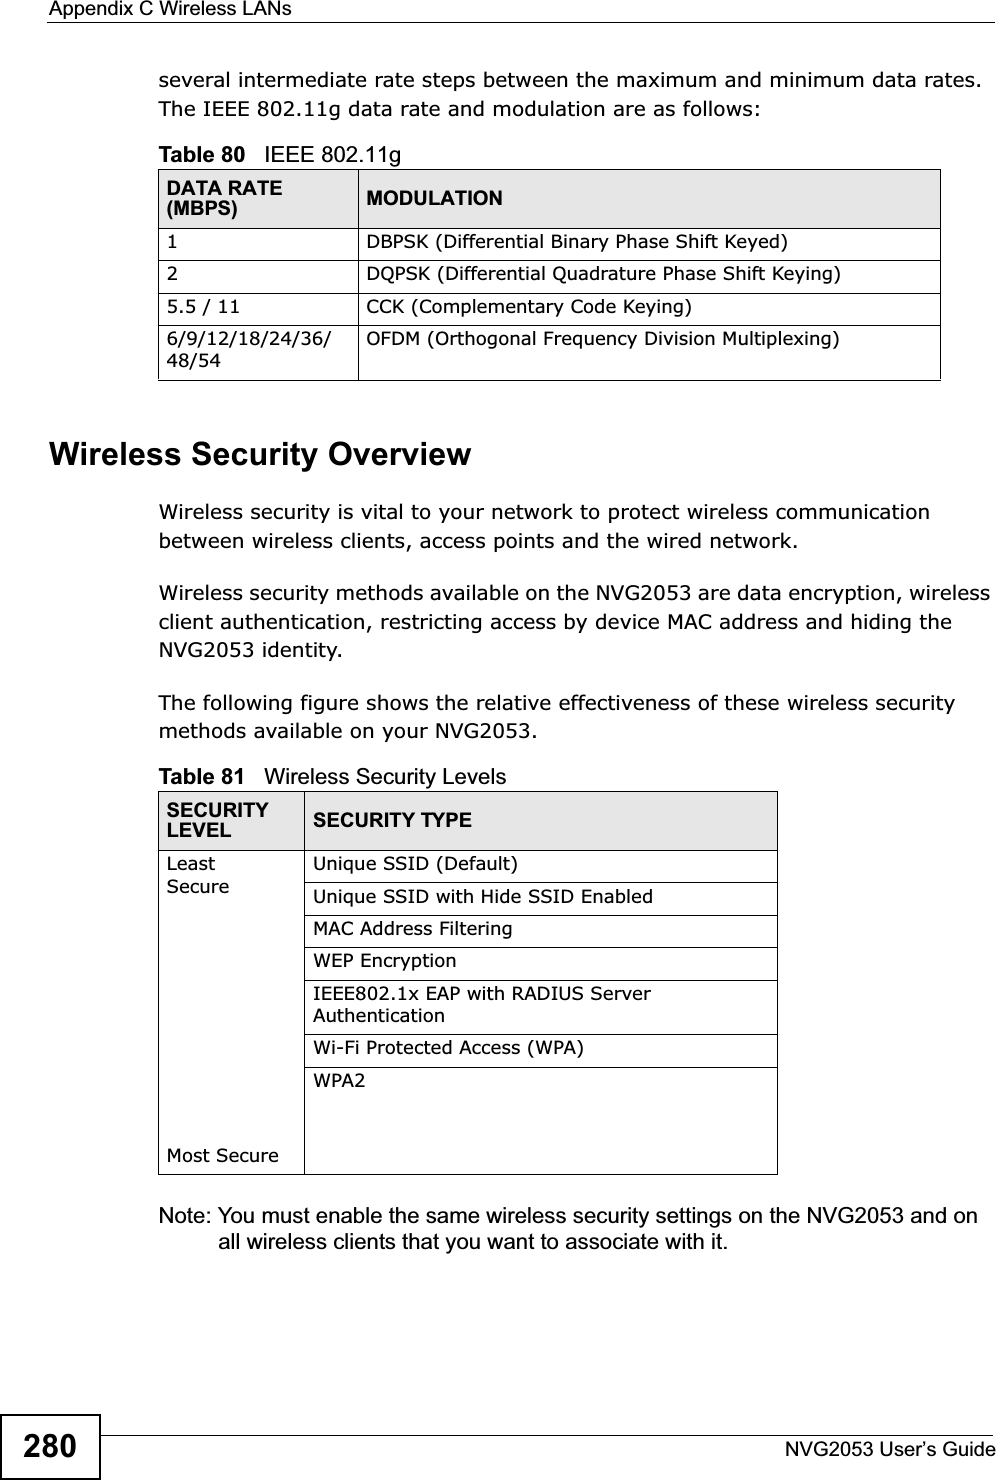 Appendix C Wireless LANsNVG2053 User’s Guide280several intermediate rate steps between the maximum and minimum data rates. The IEEE 802.11g data rate and modulation are as follows:Wireless Security OverviewWireless security is vital to your network to protect wireless communication between wireless clients, access points and the wired network.Wireless security methods available on the NVG2053 are data encryption, wireless client authentication, restricting access by device MAC address and hiding the NVG2053 identity.The following figure shows the relative effectiveness of these wireless security methods available on your NVG2053.Note: You must enable the same wireless security settings on the NVG2053 and on all wireless clients that you want to associate with it. Table 80   IEEE 802.11gDATA RATE (MBPS) MODULATION1 DBPSK (Differential Binary Phase Shift Keyed)2 DQPSK (Differential Quadrature Phase Shift Keying)5.5 / 11 CCK (Complementary Code Keying) 6/9/12/18/24/36/48/54OFDM (Orthogonal Frequency Division Multiplexing) Table 81   Wireless Security LevelsSECURITYLEVEL SECURITY TYPELeast       SecureMost SecureUnique SSID (Default)Unique SSID with Hide SSID EnabledMAC Address FilteringWEP EncryptionIEEE802.1x EAP with RADIUS Server AuthenticationWi-Fi Protected Access (WPA)WPA2